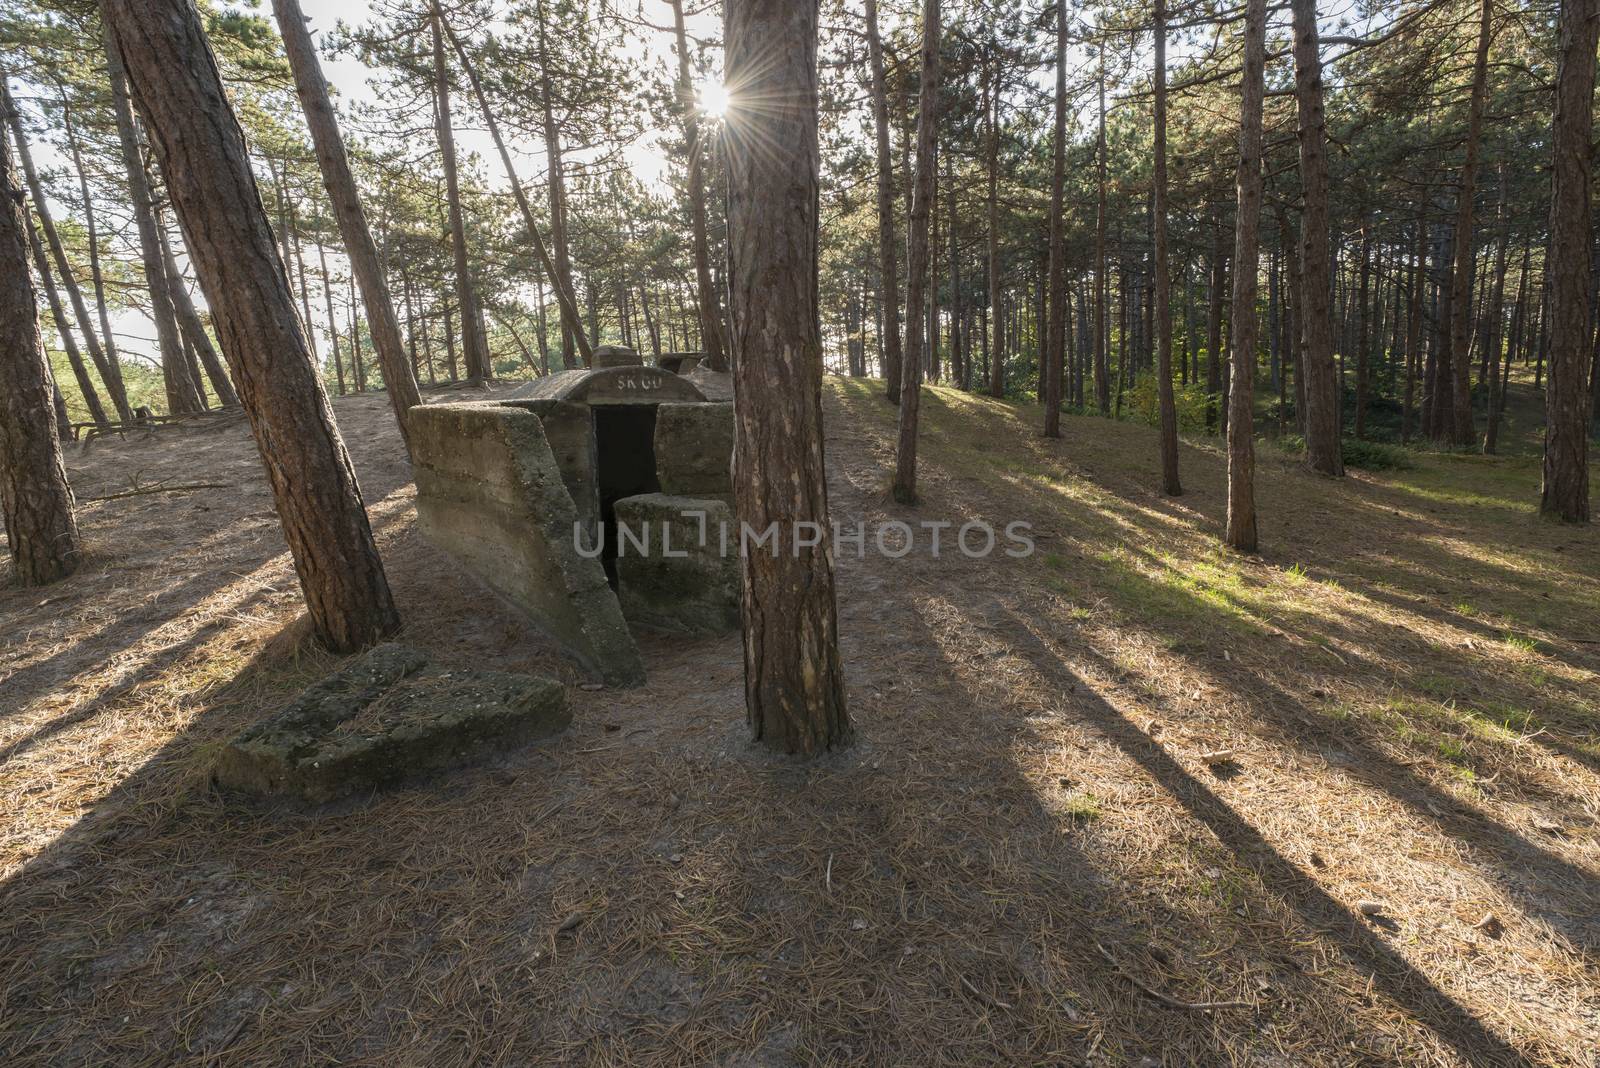 Old German bunker on the island of Terschelling in the Netherlands, part of the Atlantic Wall, a more than 5000 kilometres long line of defence, which nazi Germany during the second world war in the occupied territories has laid out to prevent an Allied invasion
